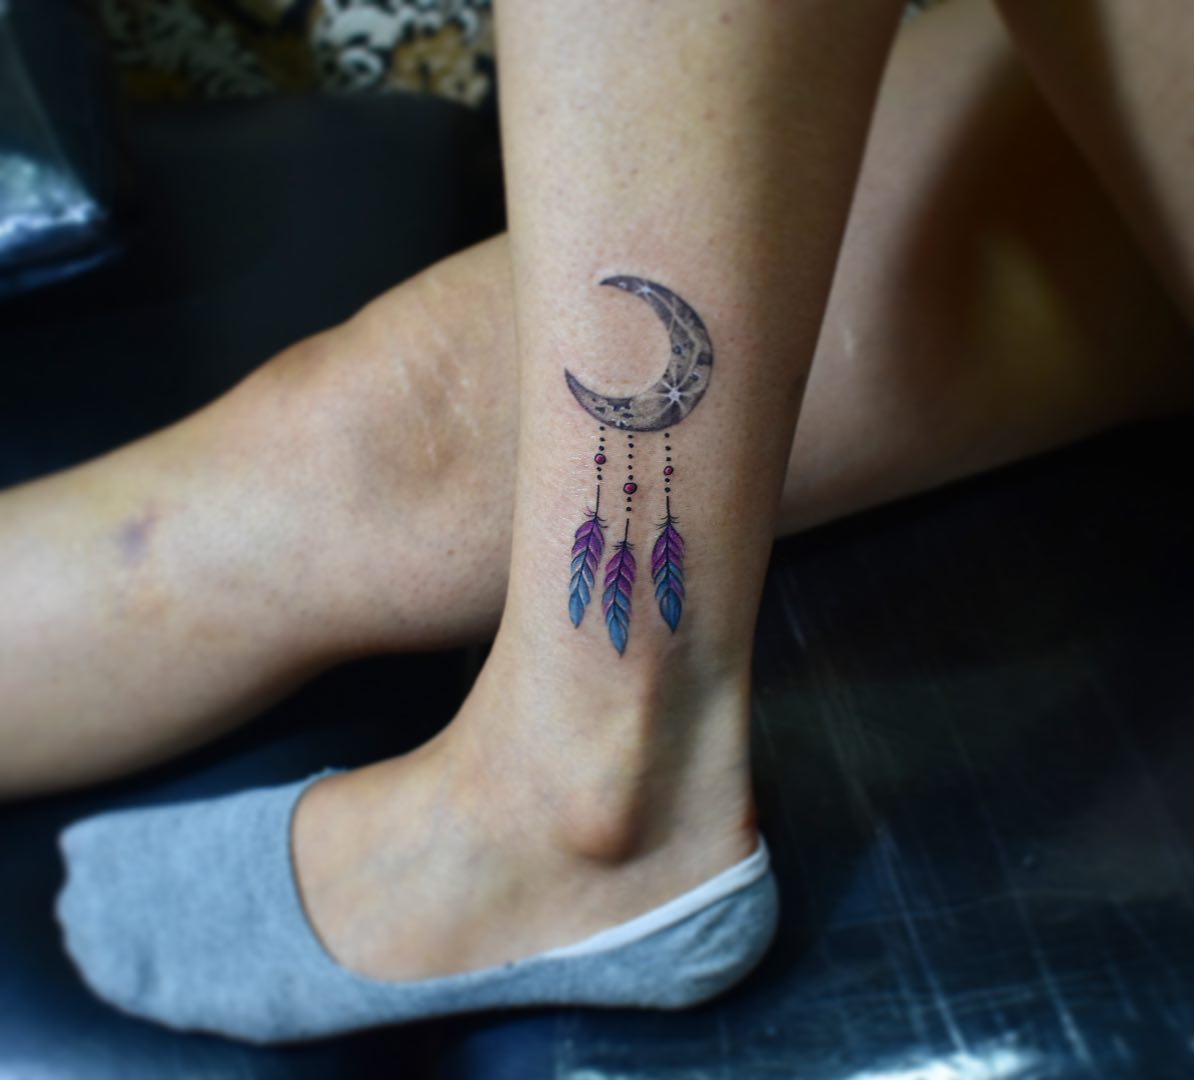 Moon dream catcher is believed to protect its wearer from nightmares, bad dreams and negative energy. You can get a minimal tattoo of it on your leg to shine out. All you need is a black moon with three blue and purple feathers.